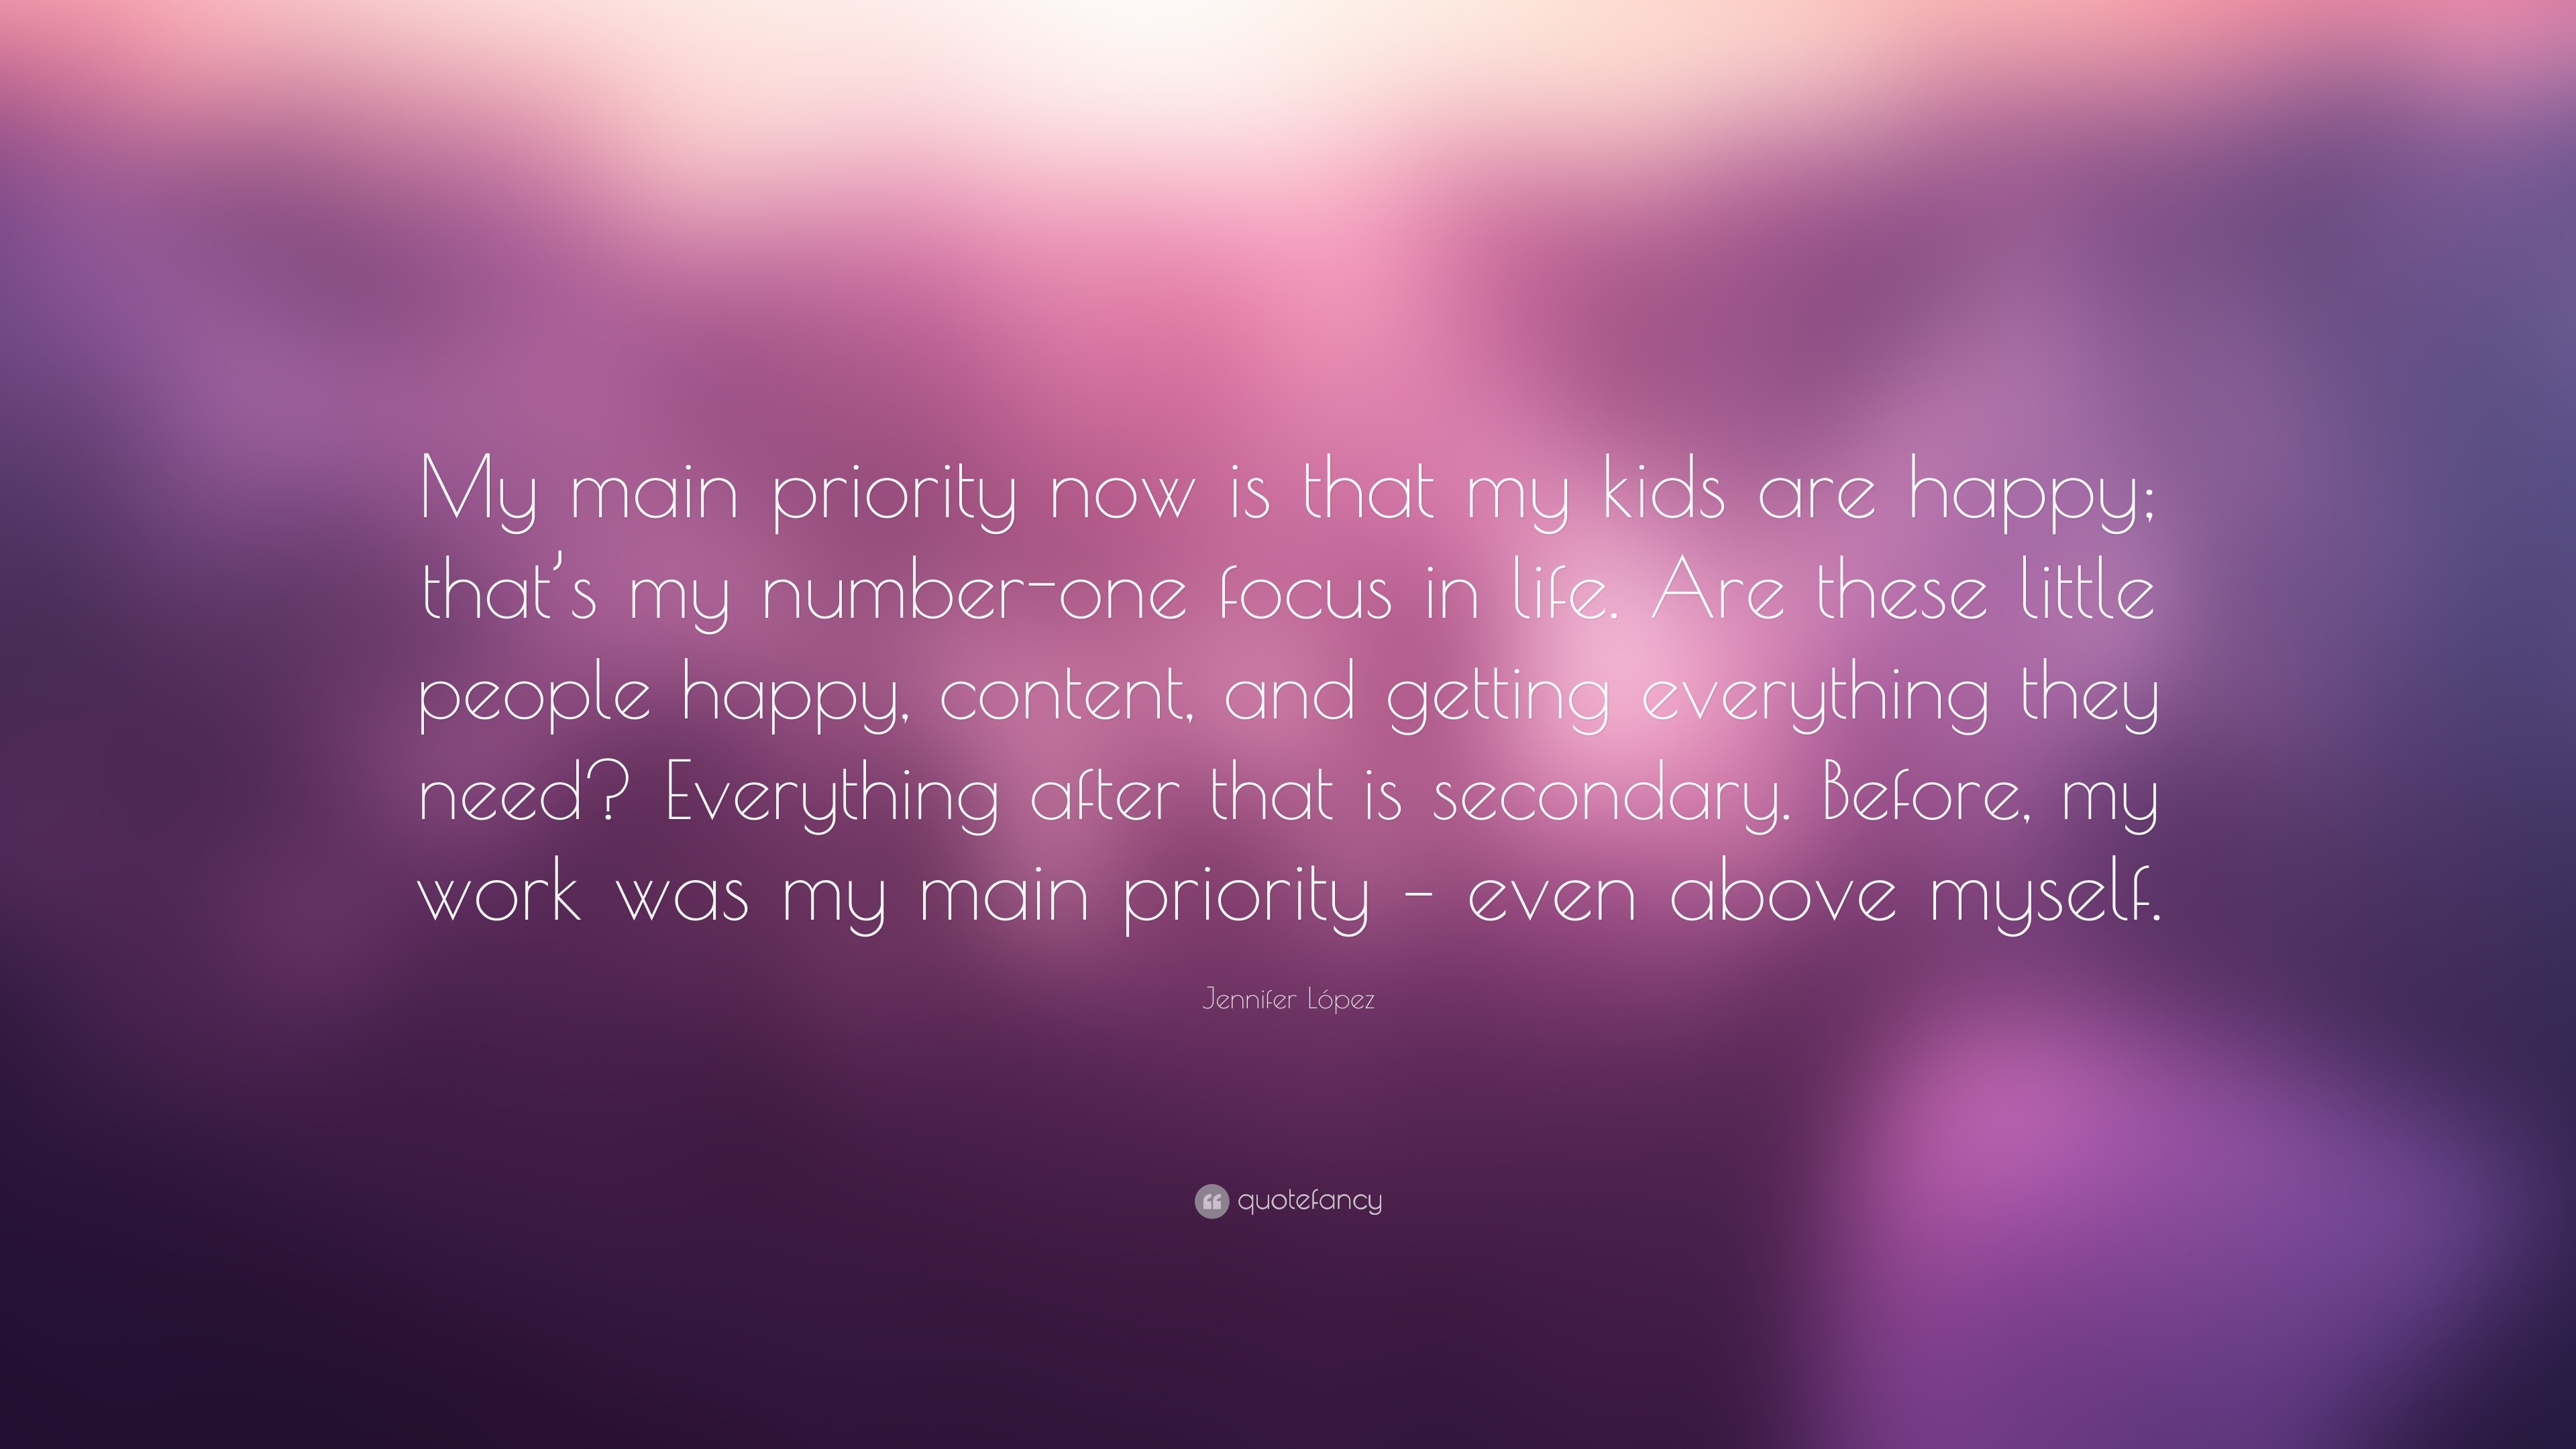 Jennifer López Quote: “My main priority now is that my kids are happy ...